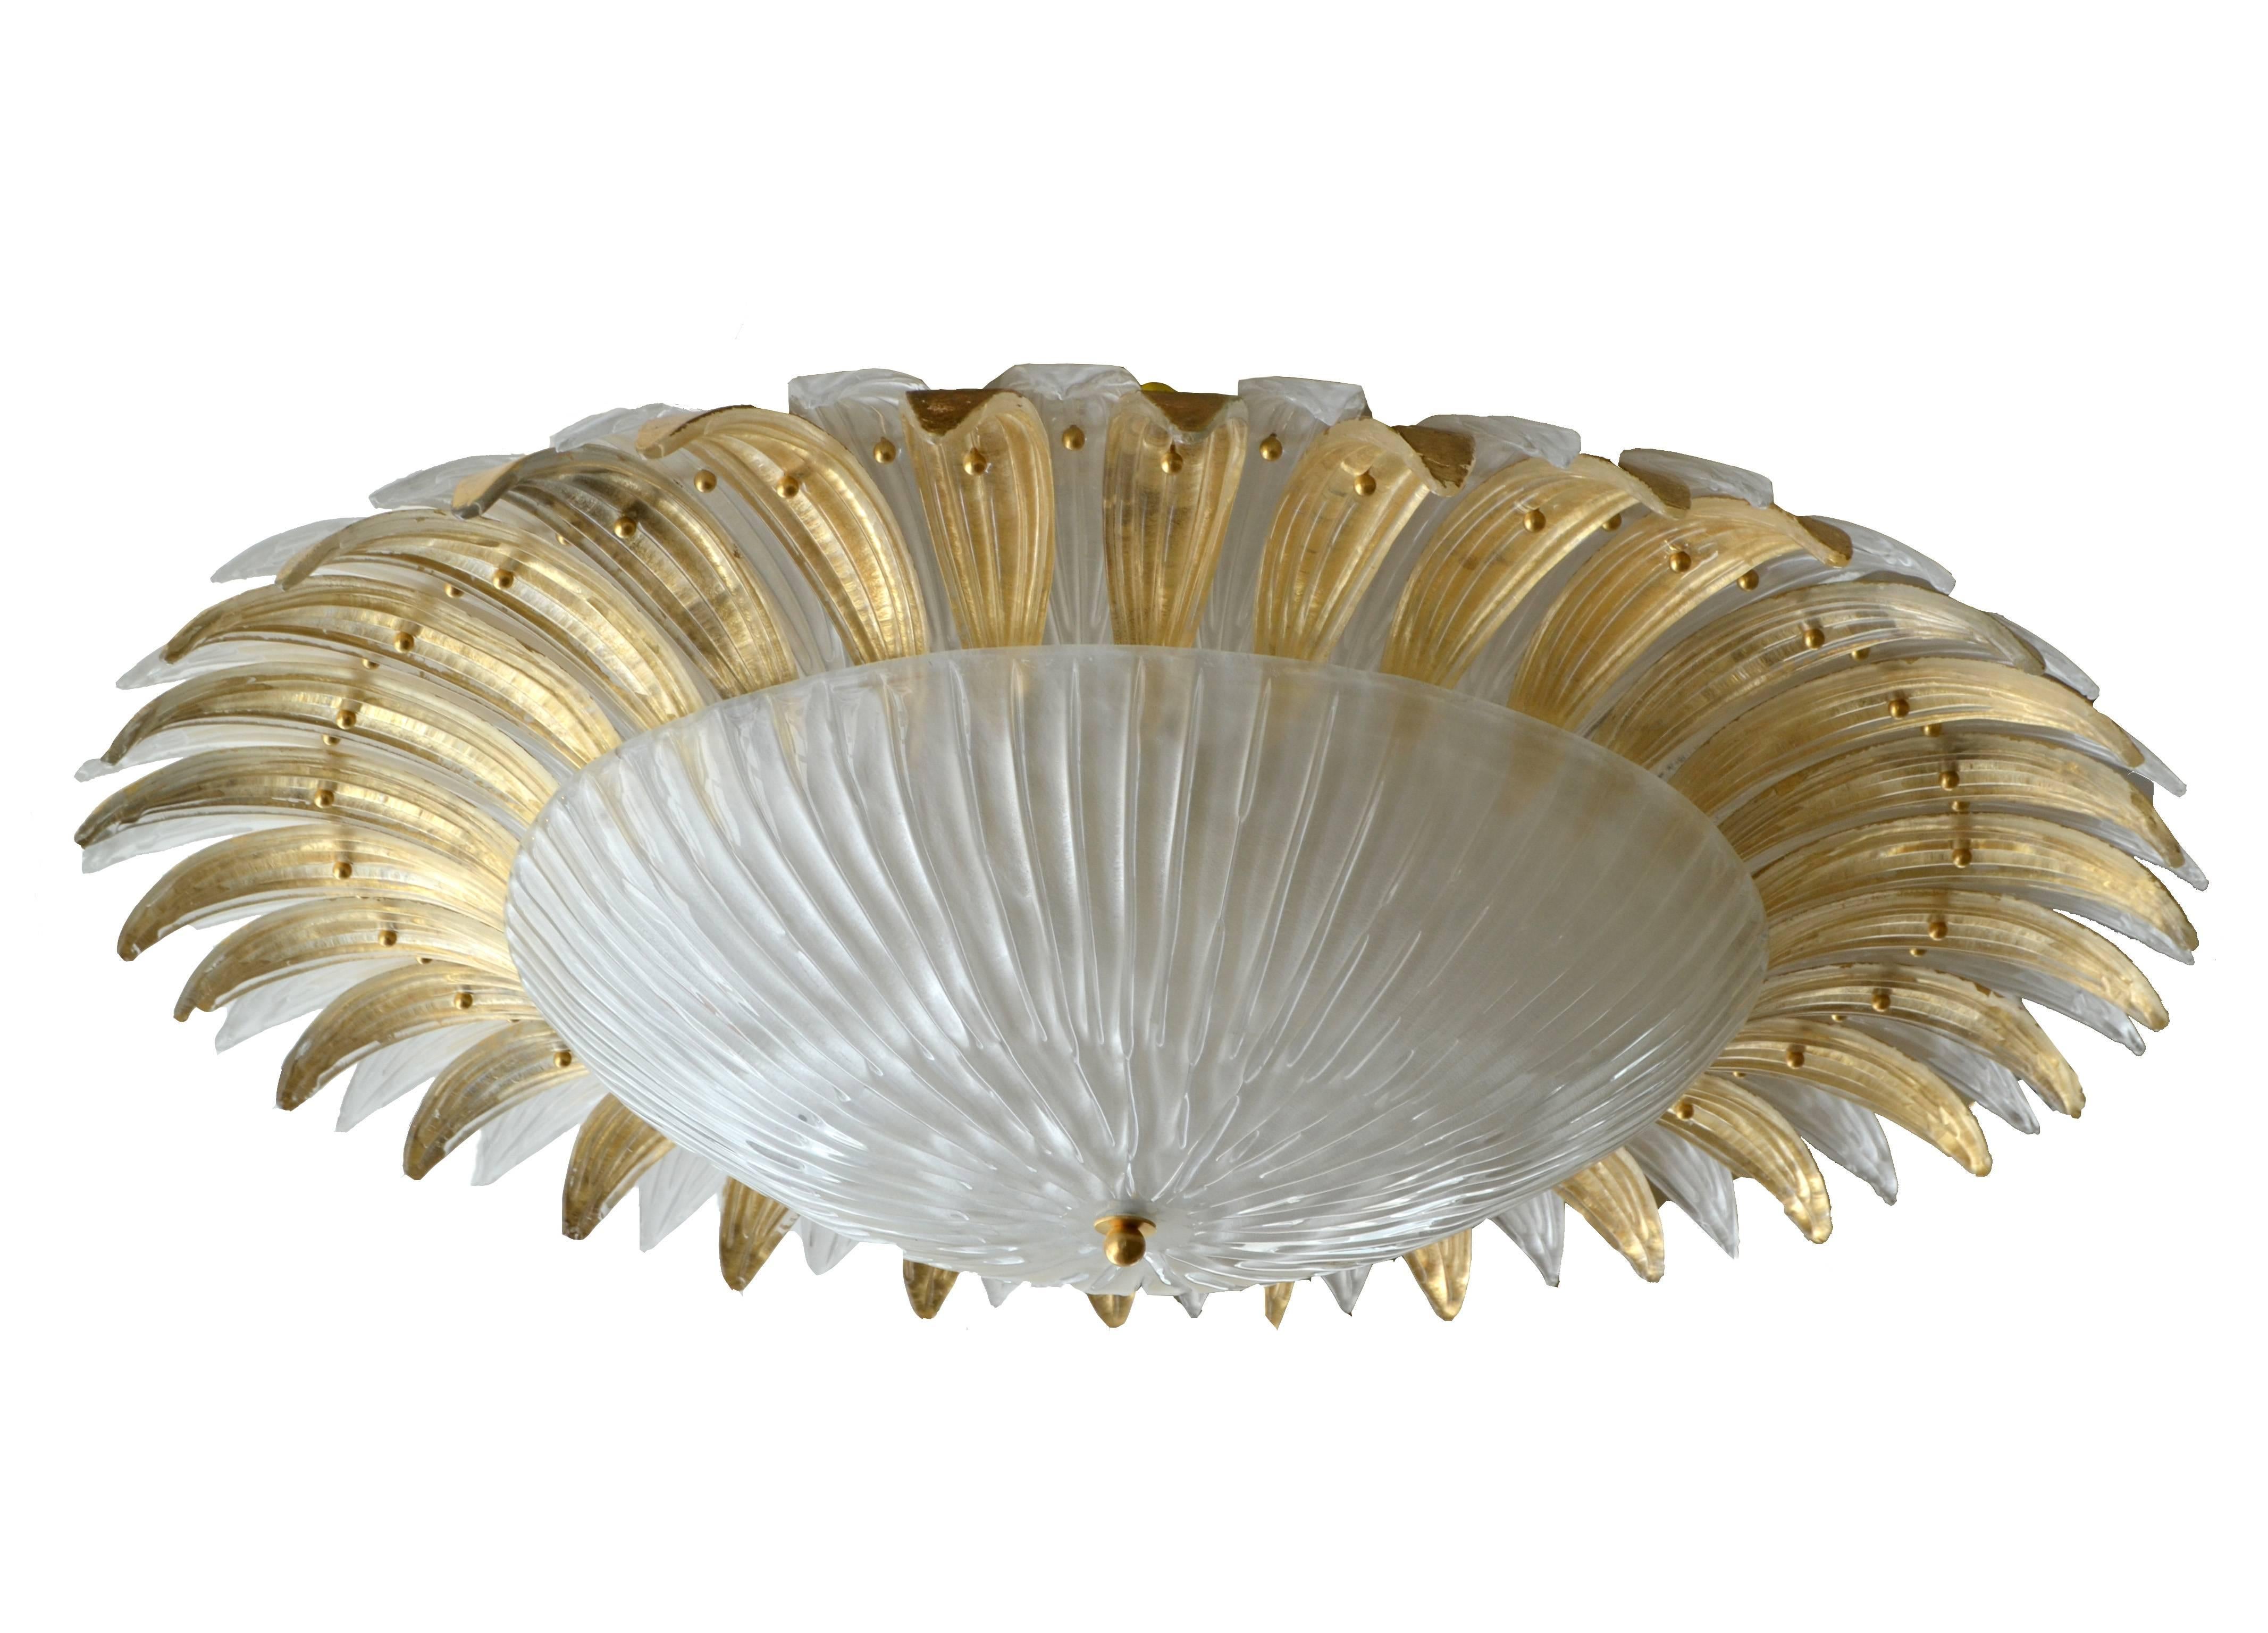 Offered is a stunning palm leaf chandelier in Murano glass from Italy. This chandelier is arranged with gold and clear Murano glass palm leaves, flush mounted to the ceiling. 

Wired for the U.S. and uses six regular light bulbs.

This